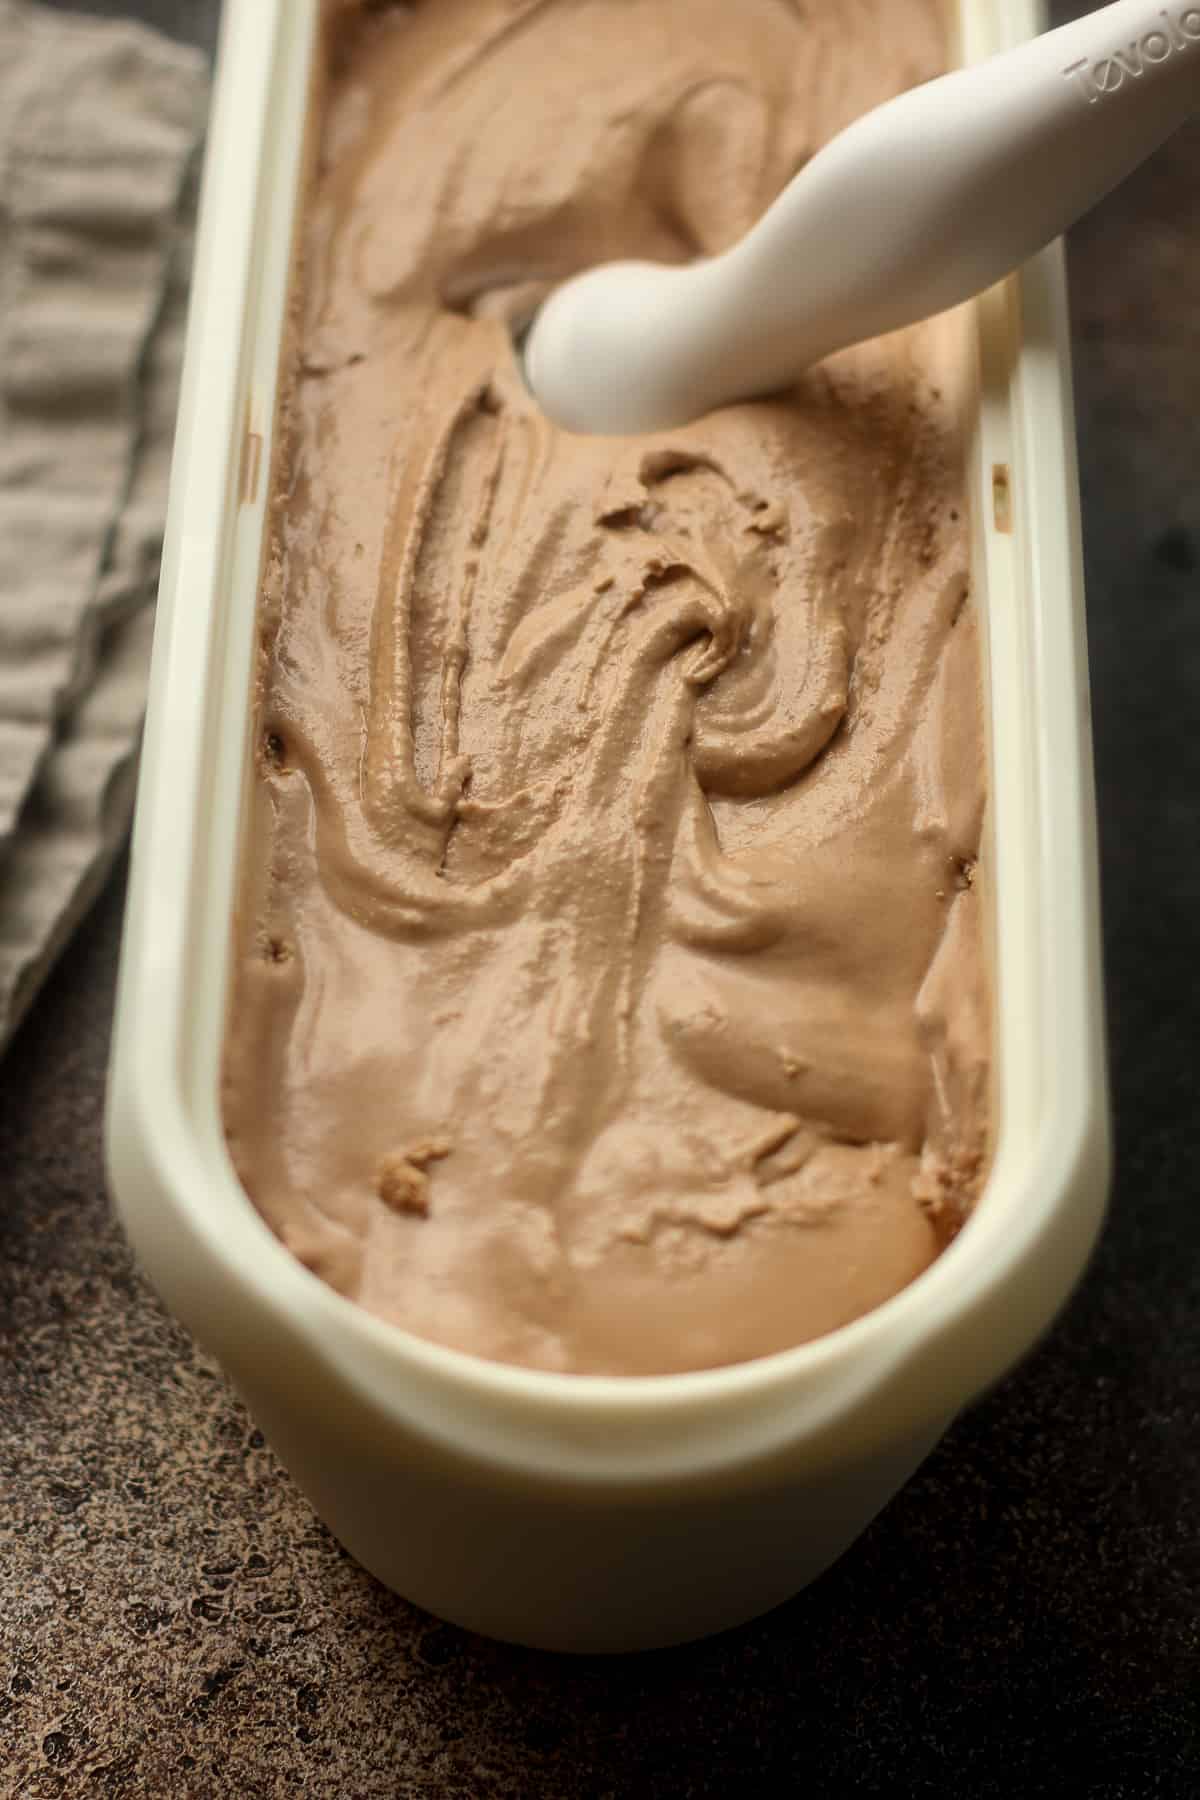 A large tub of nutella ice cream with an ice cream scoop.